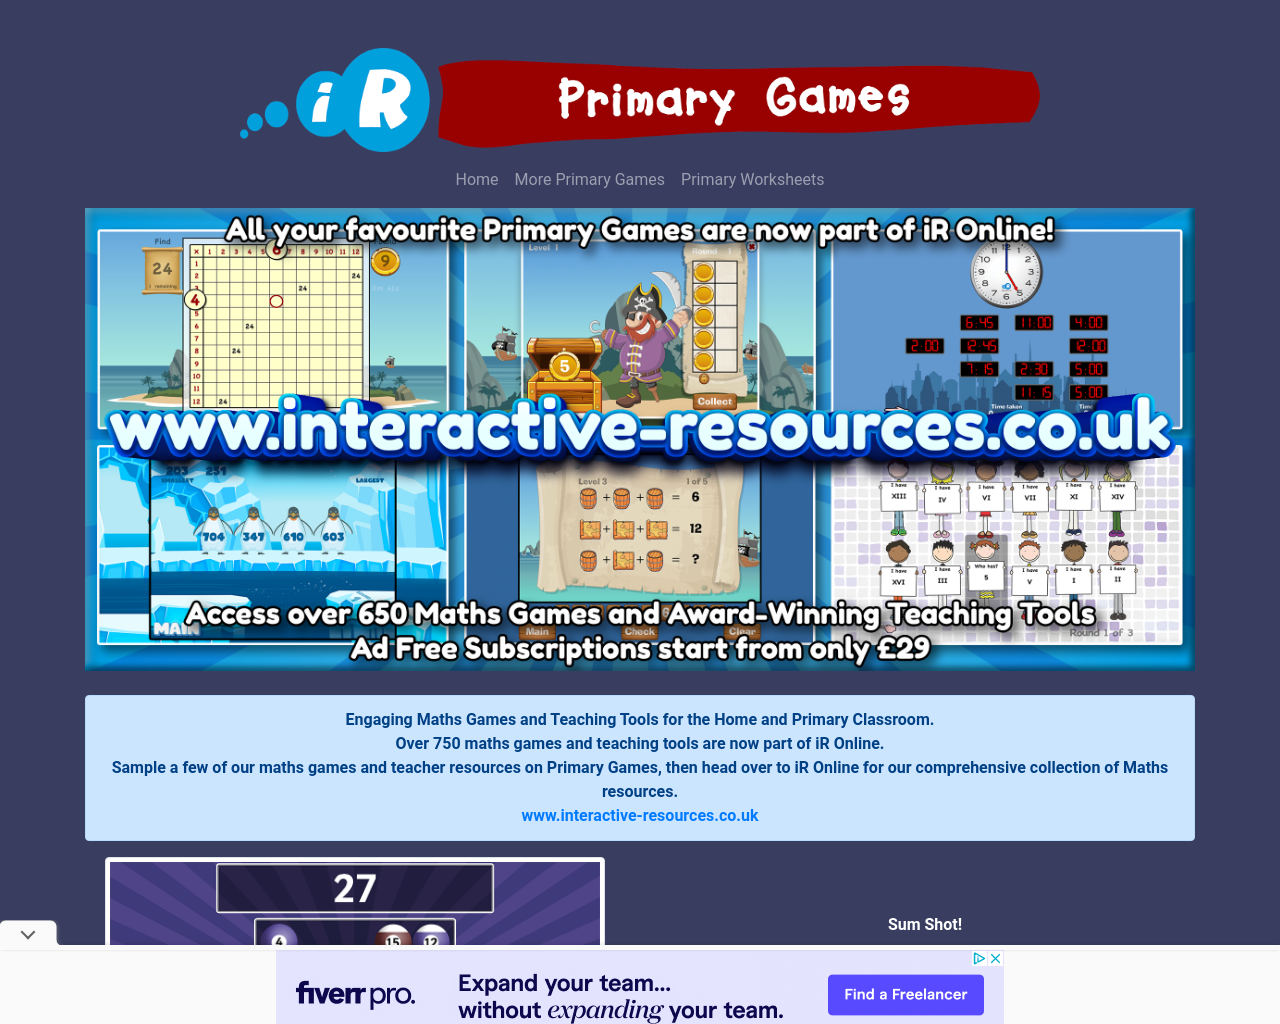 Primary Games to improve your maths skills